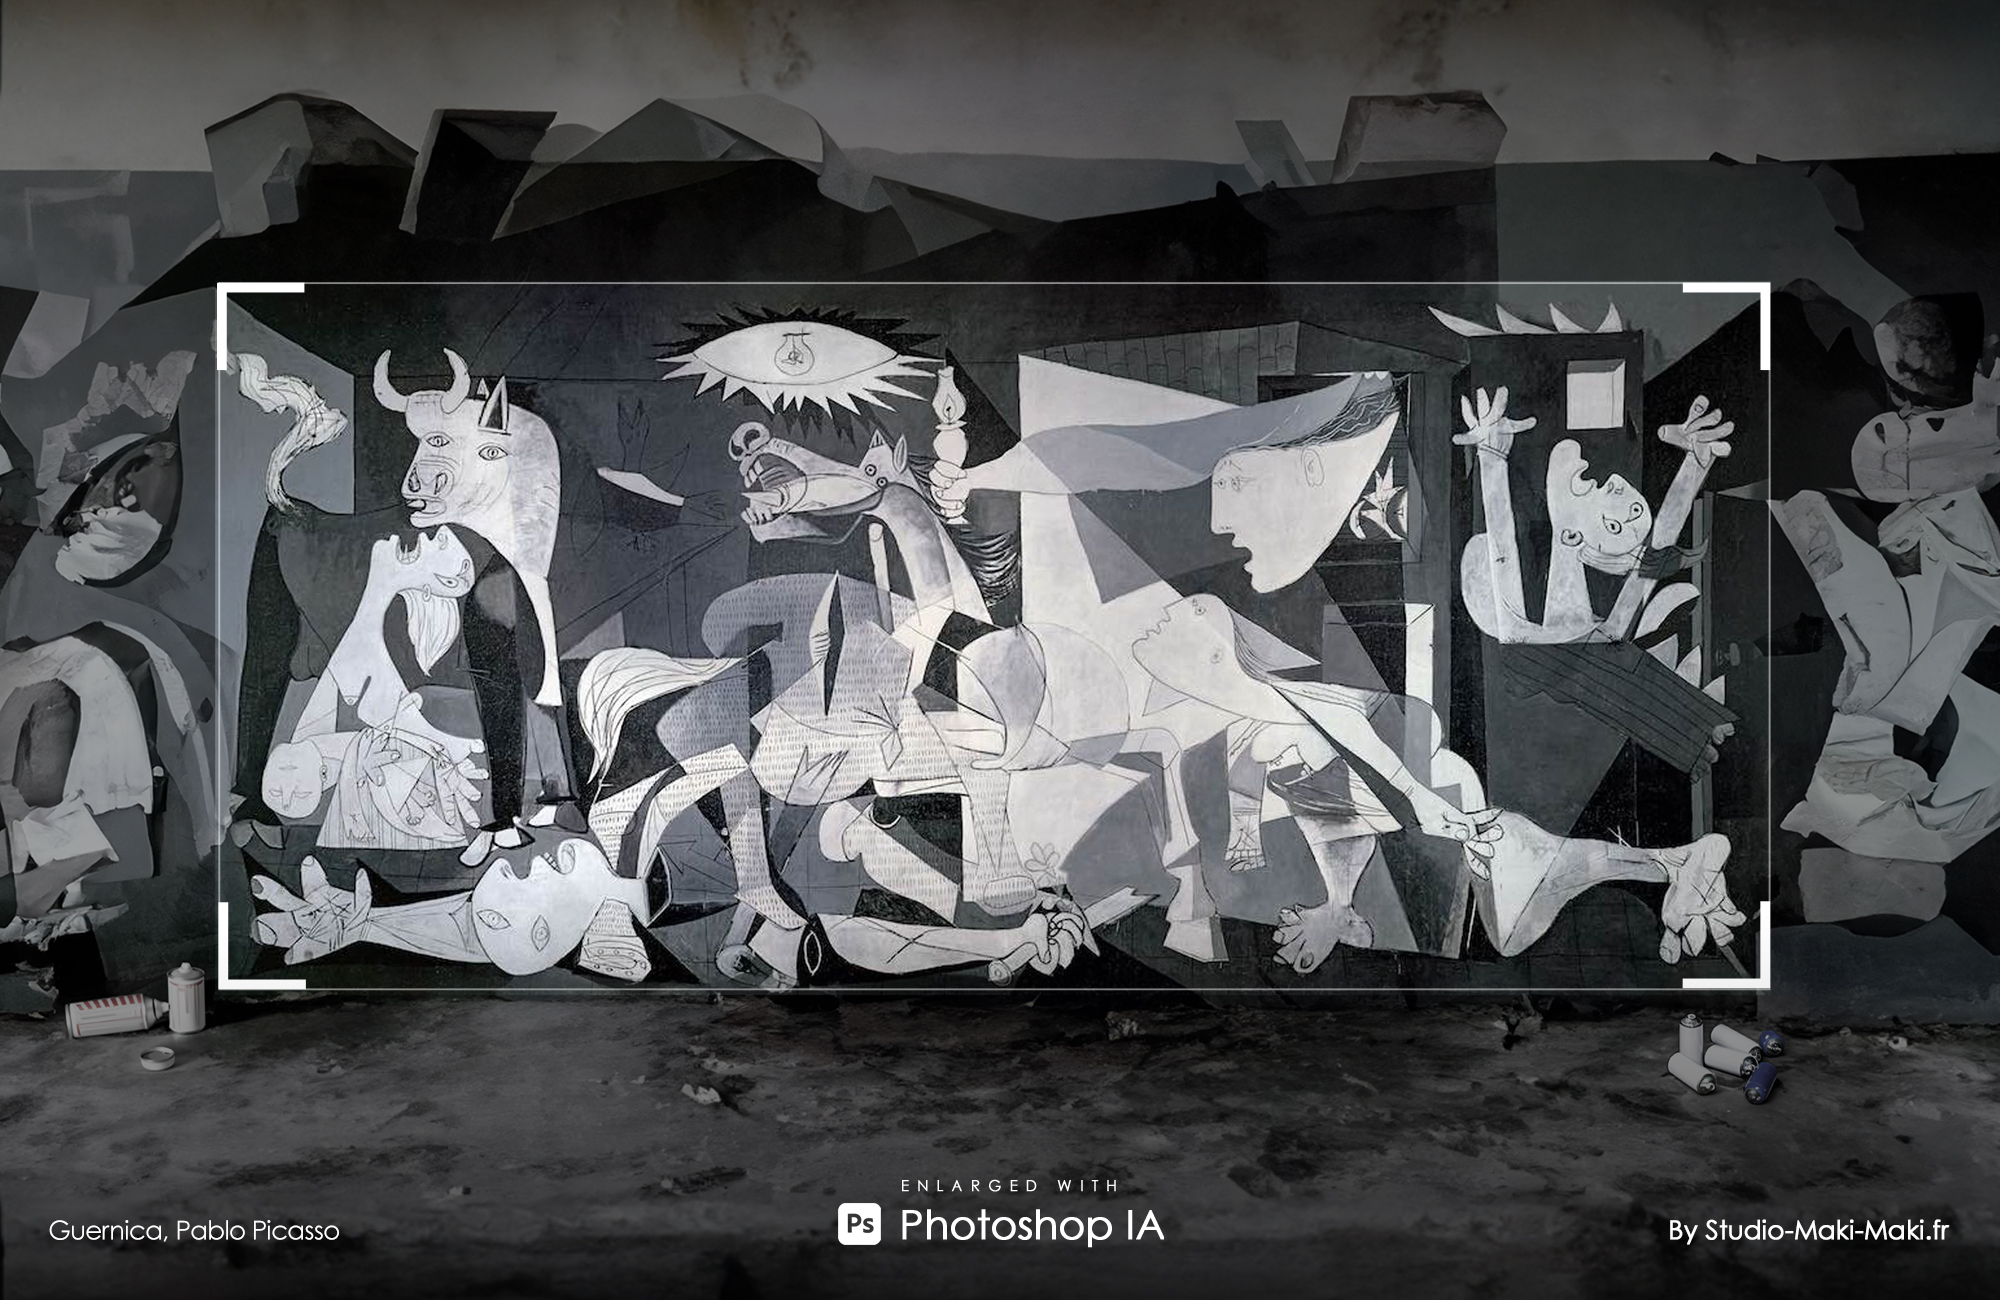 Guernica, Pablo Picasso - Enlarged with Photoshop IA - By Studio Maki Maki